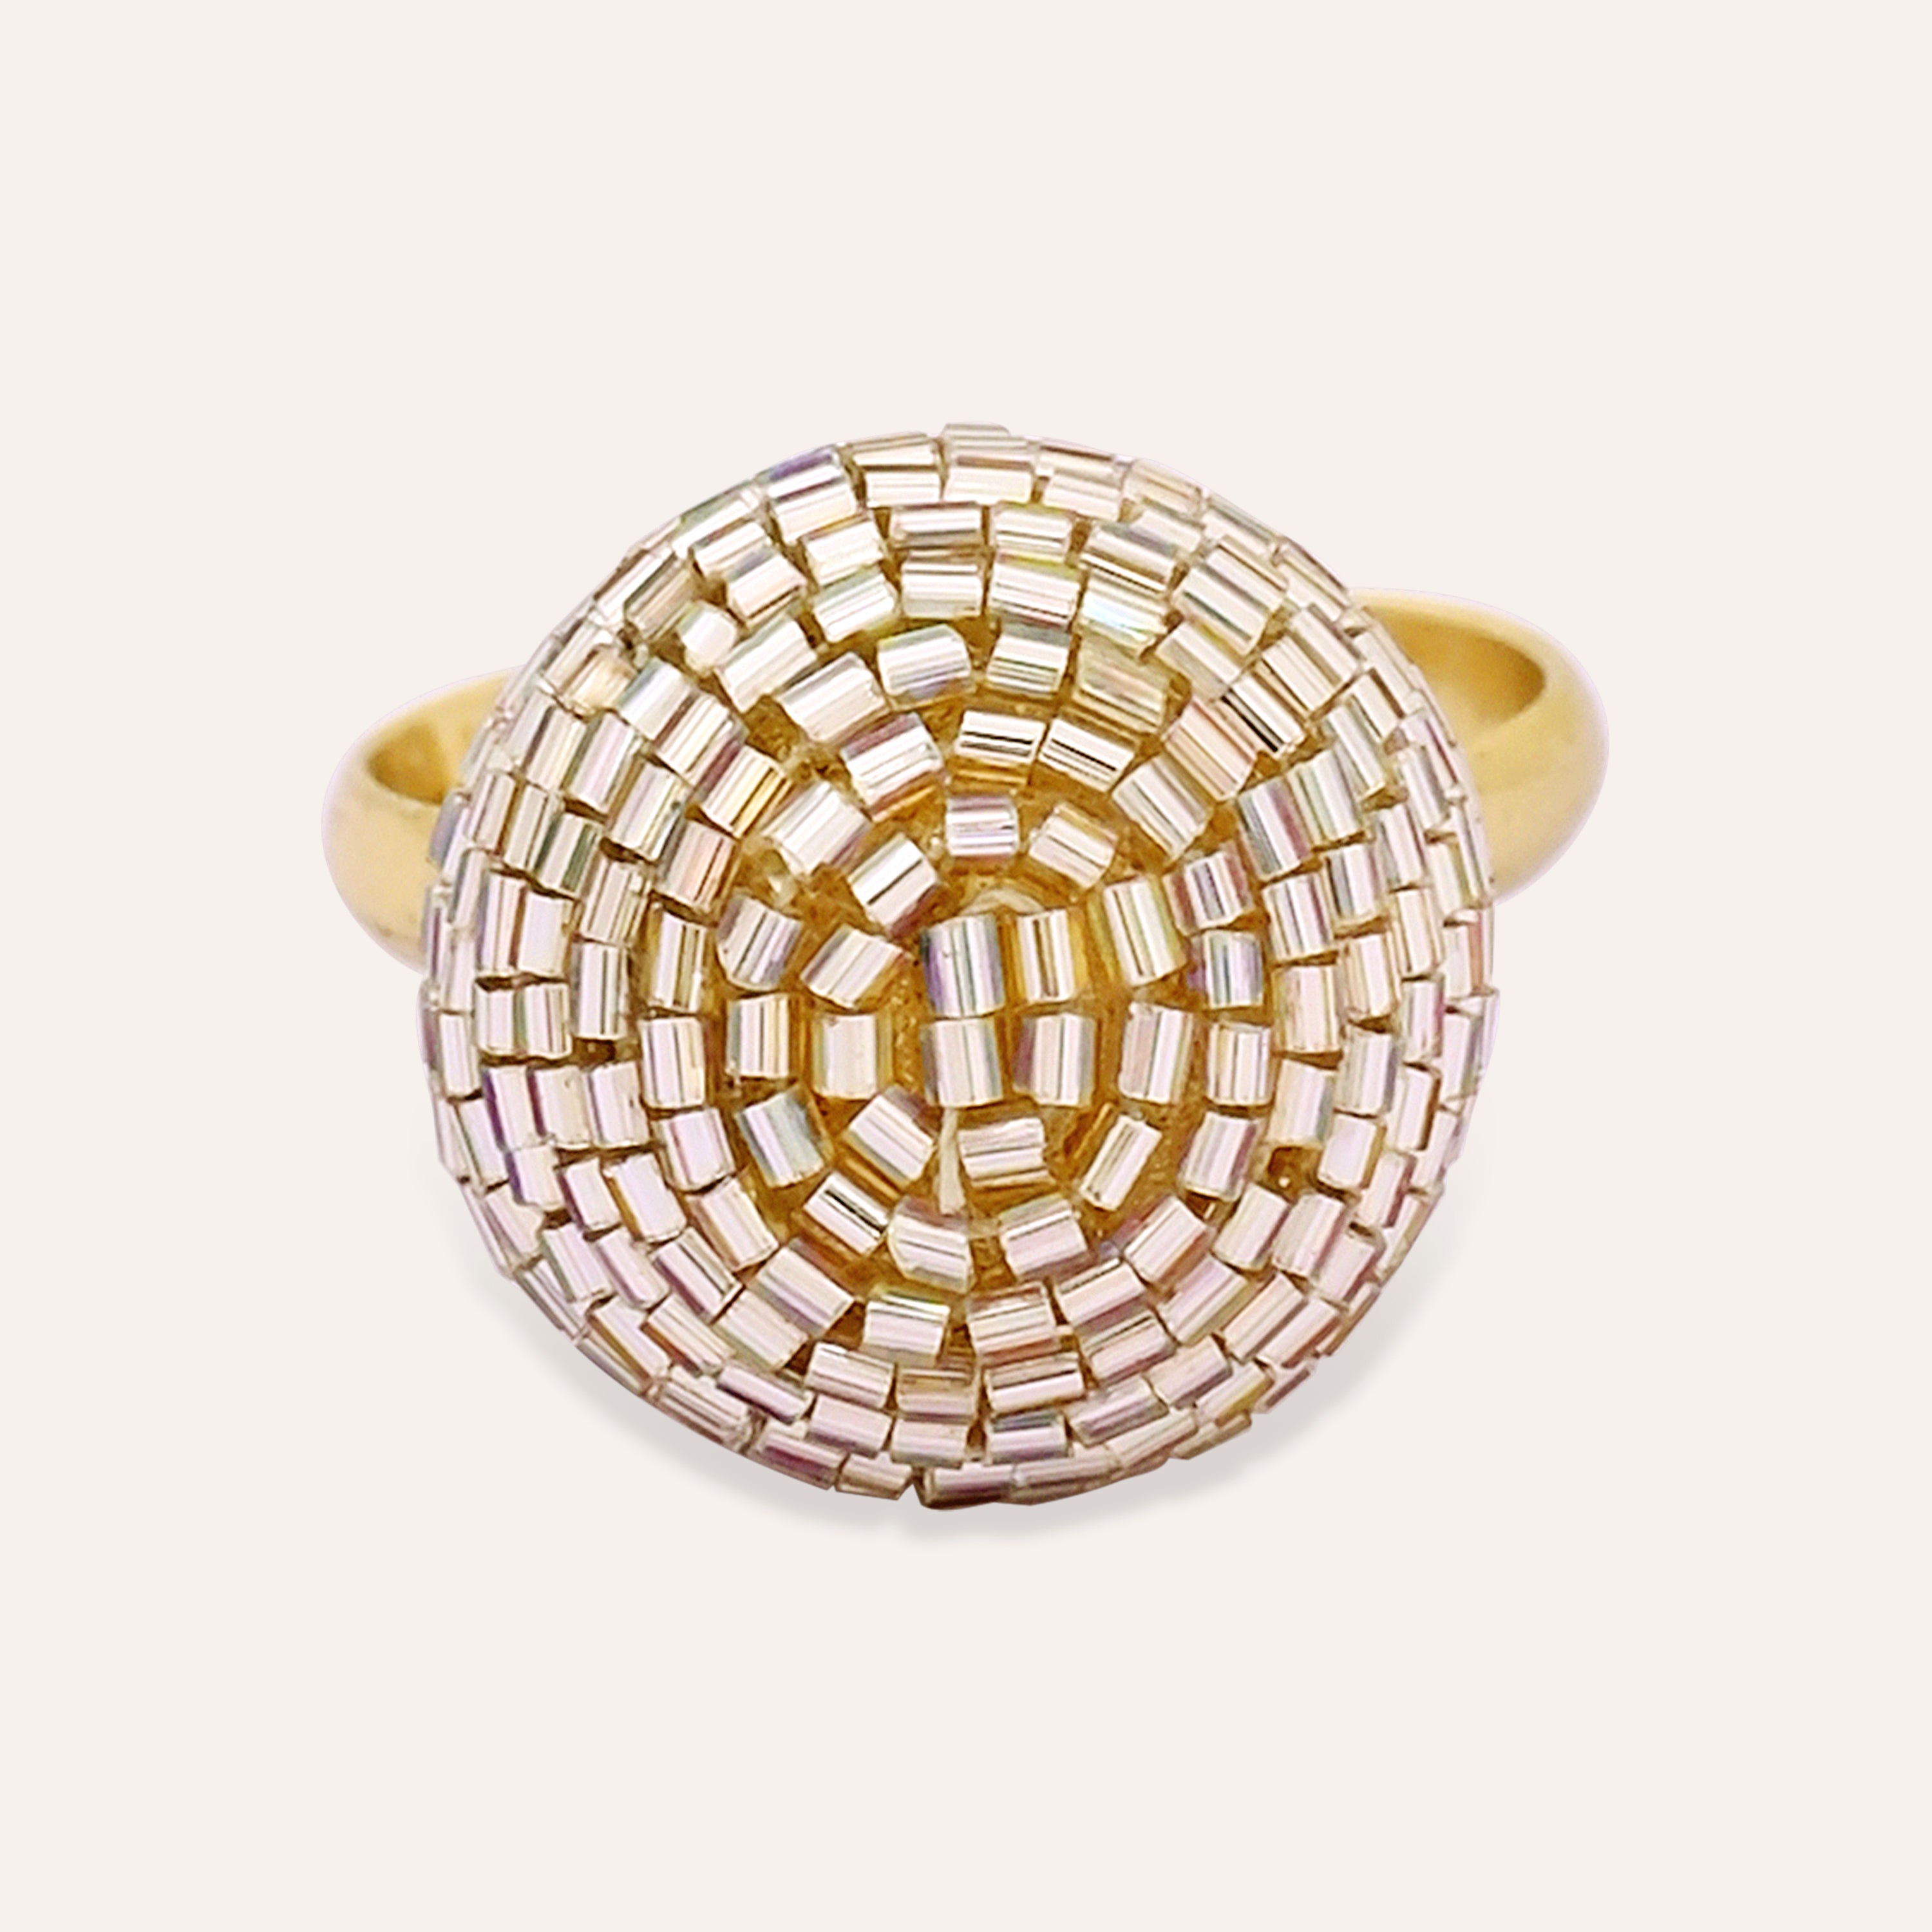 TFC Festive stunner gold statement ring- Elevate your style with our exquisite collection of gold-plated adjustable rings for women, including timeless signet rings. Explore cheapest fashion jewellery designs with anti-tarnish properties, all at The Fun Company with a touch of elegance